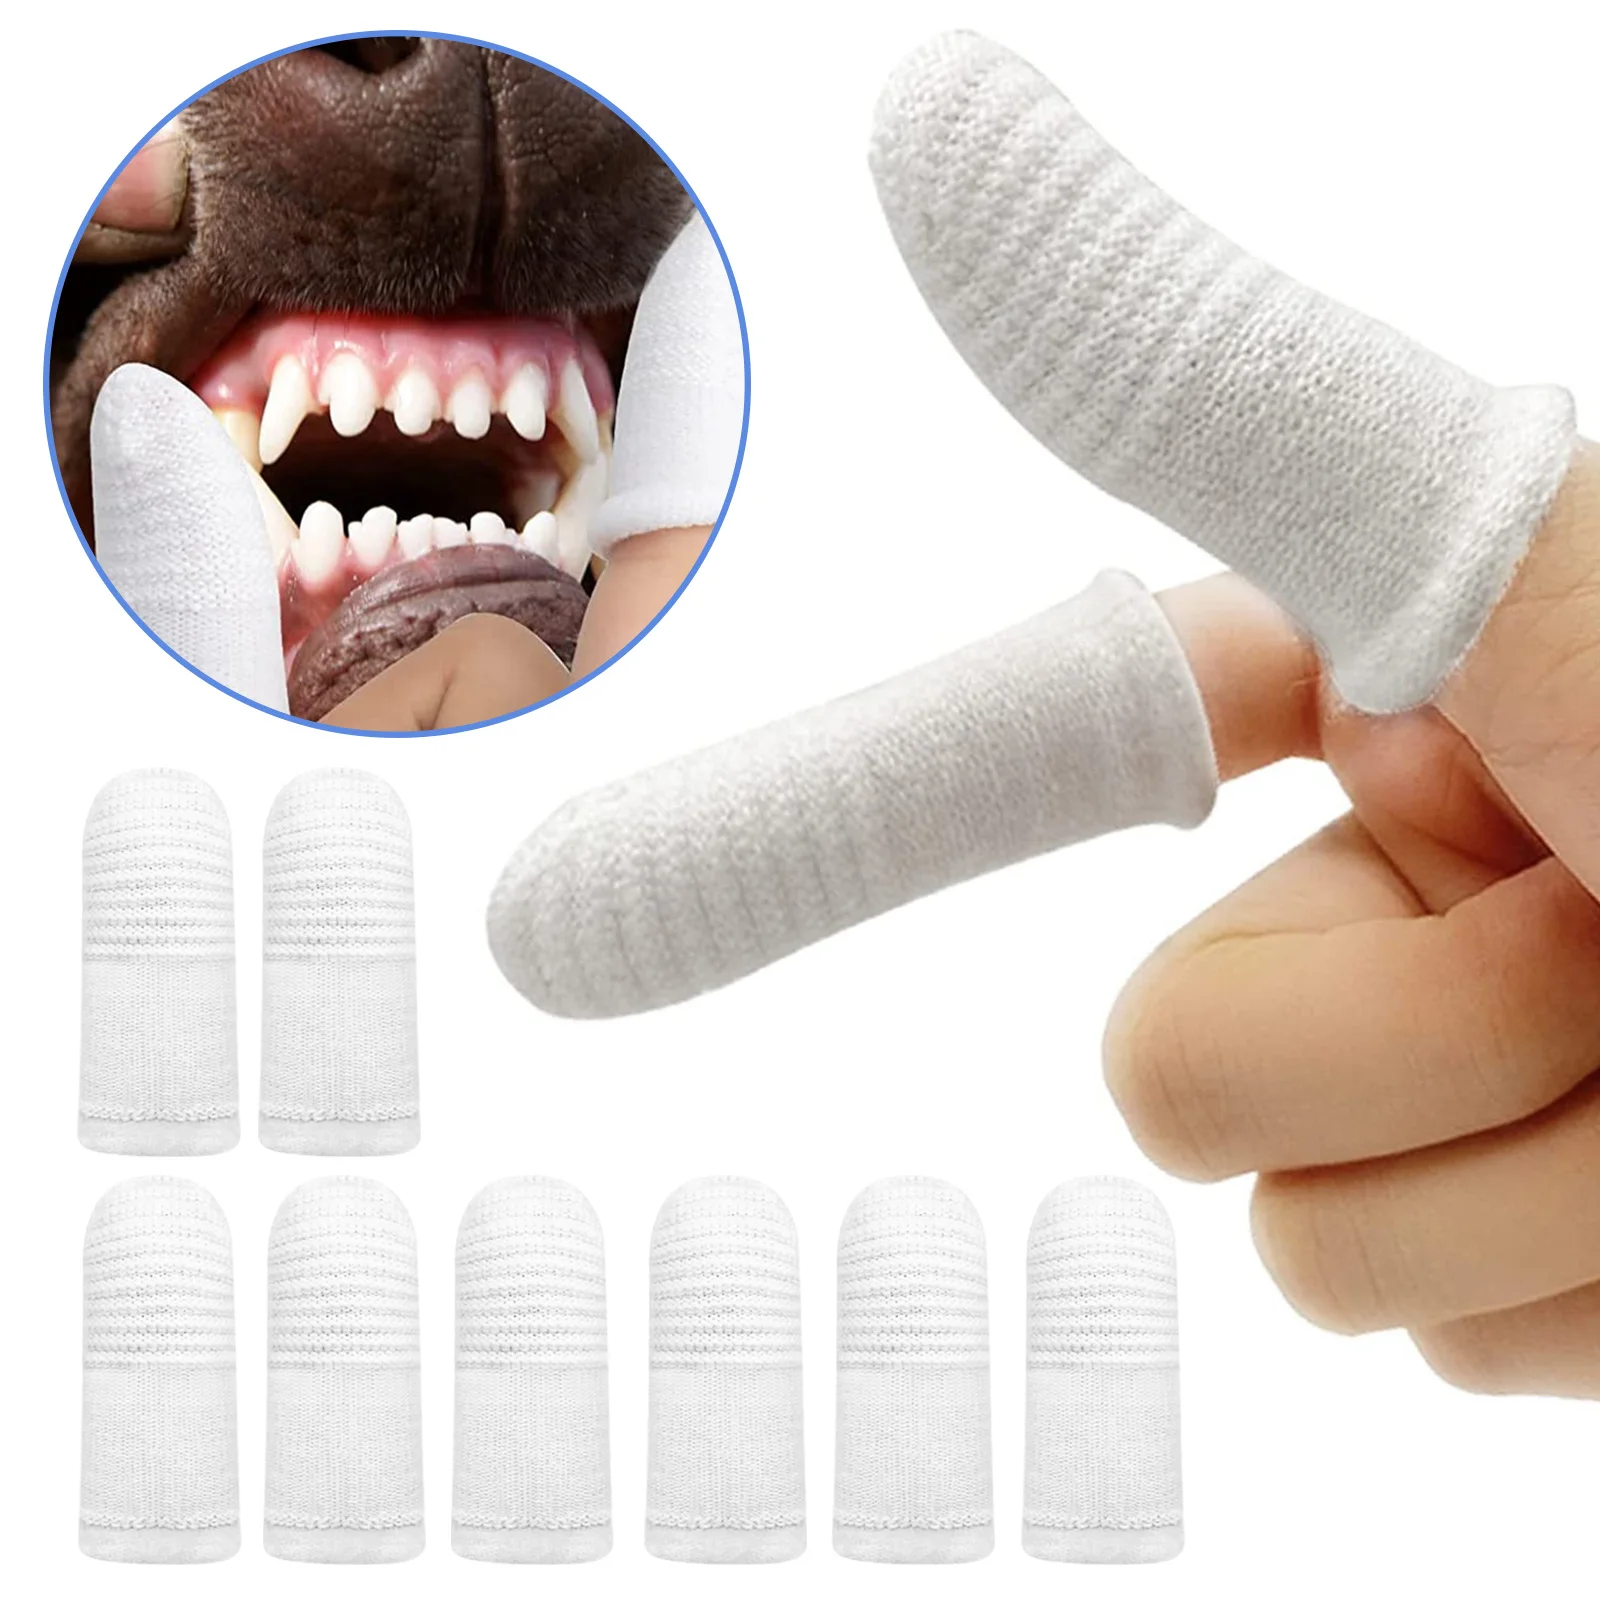 

12pcs Pet Two-finger Brushing Finger Cots Puppy Teeth Oral Cleaning Tool Kitten Finger Toothbrush Pets Care Accessories Supplies